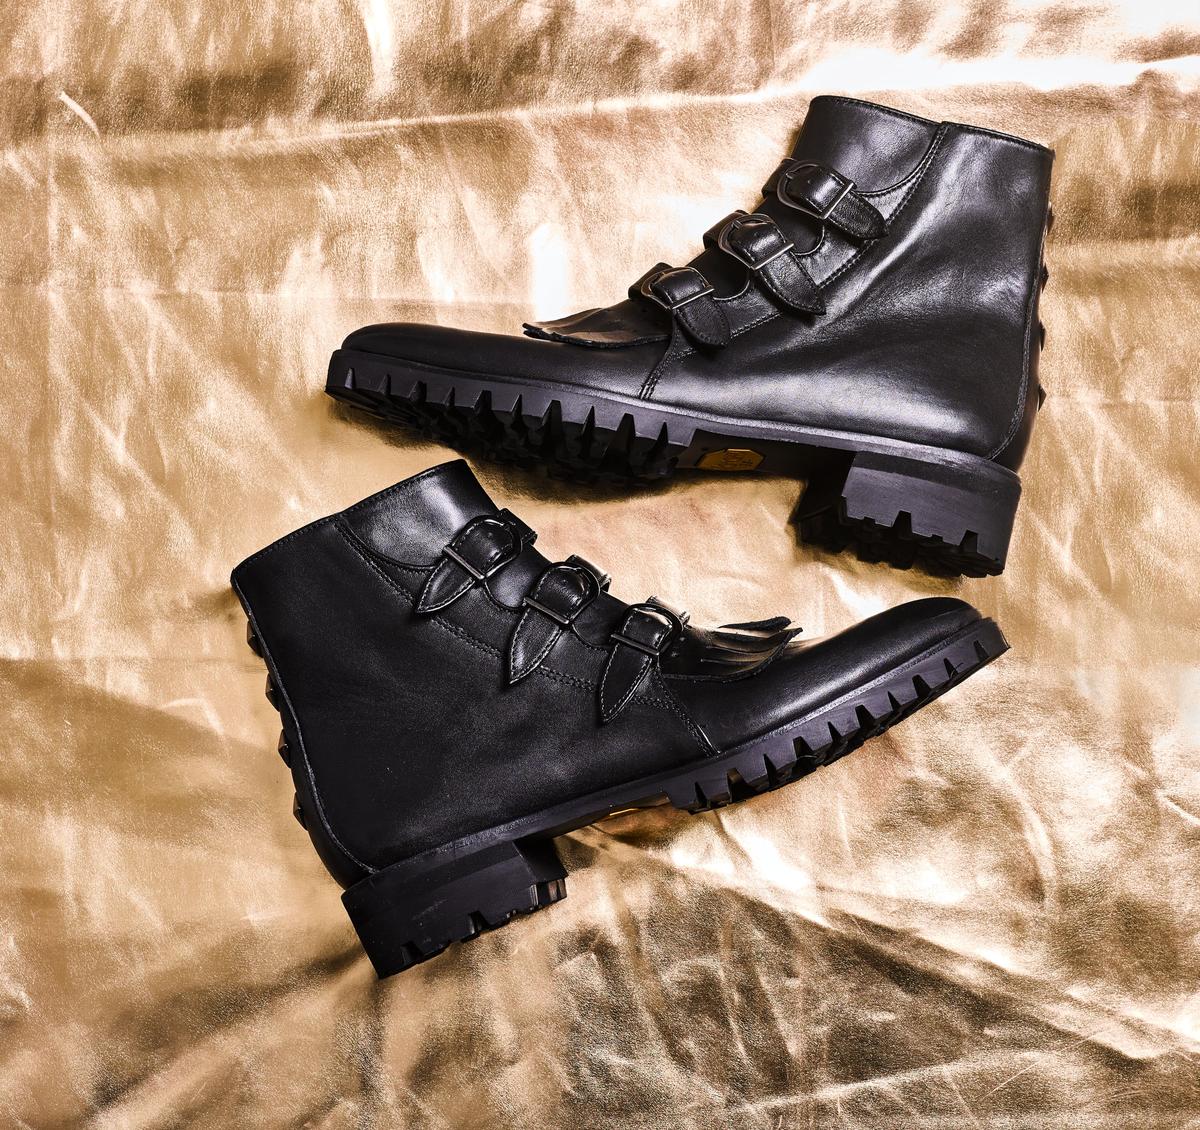 The Jett boot. (Courtesy of Modern Vice)